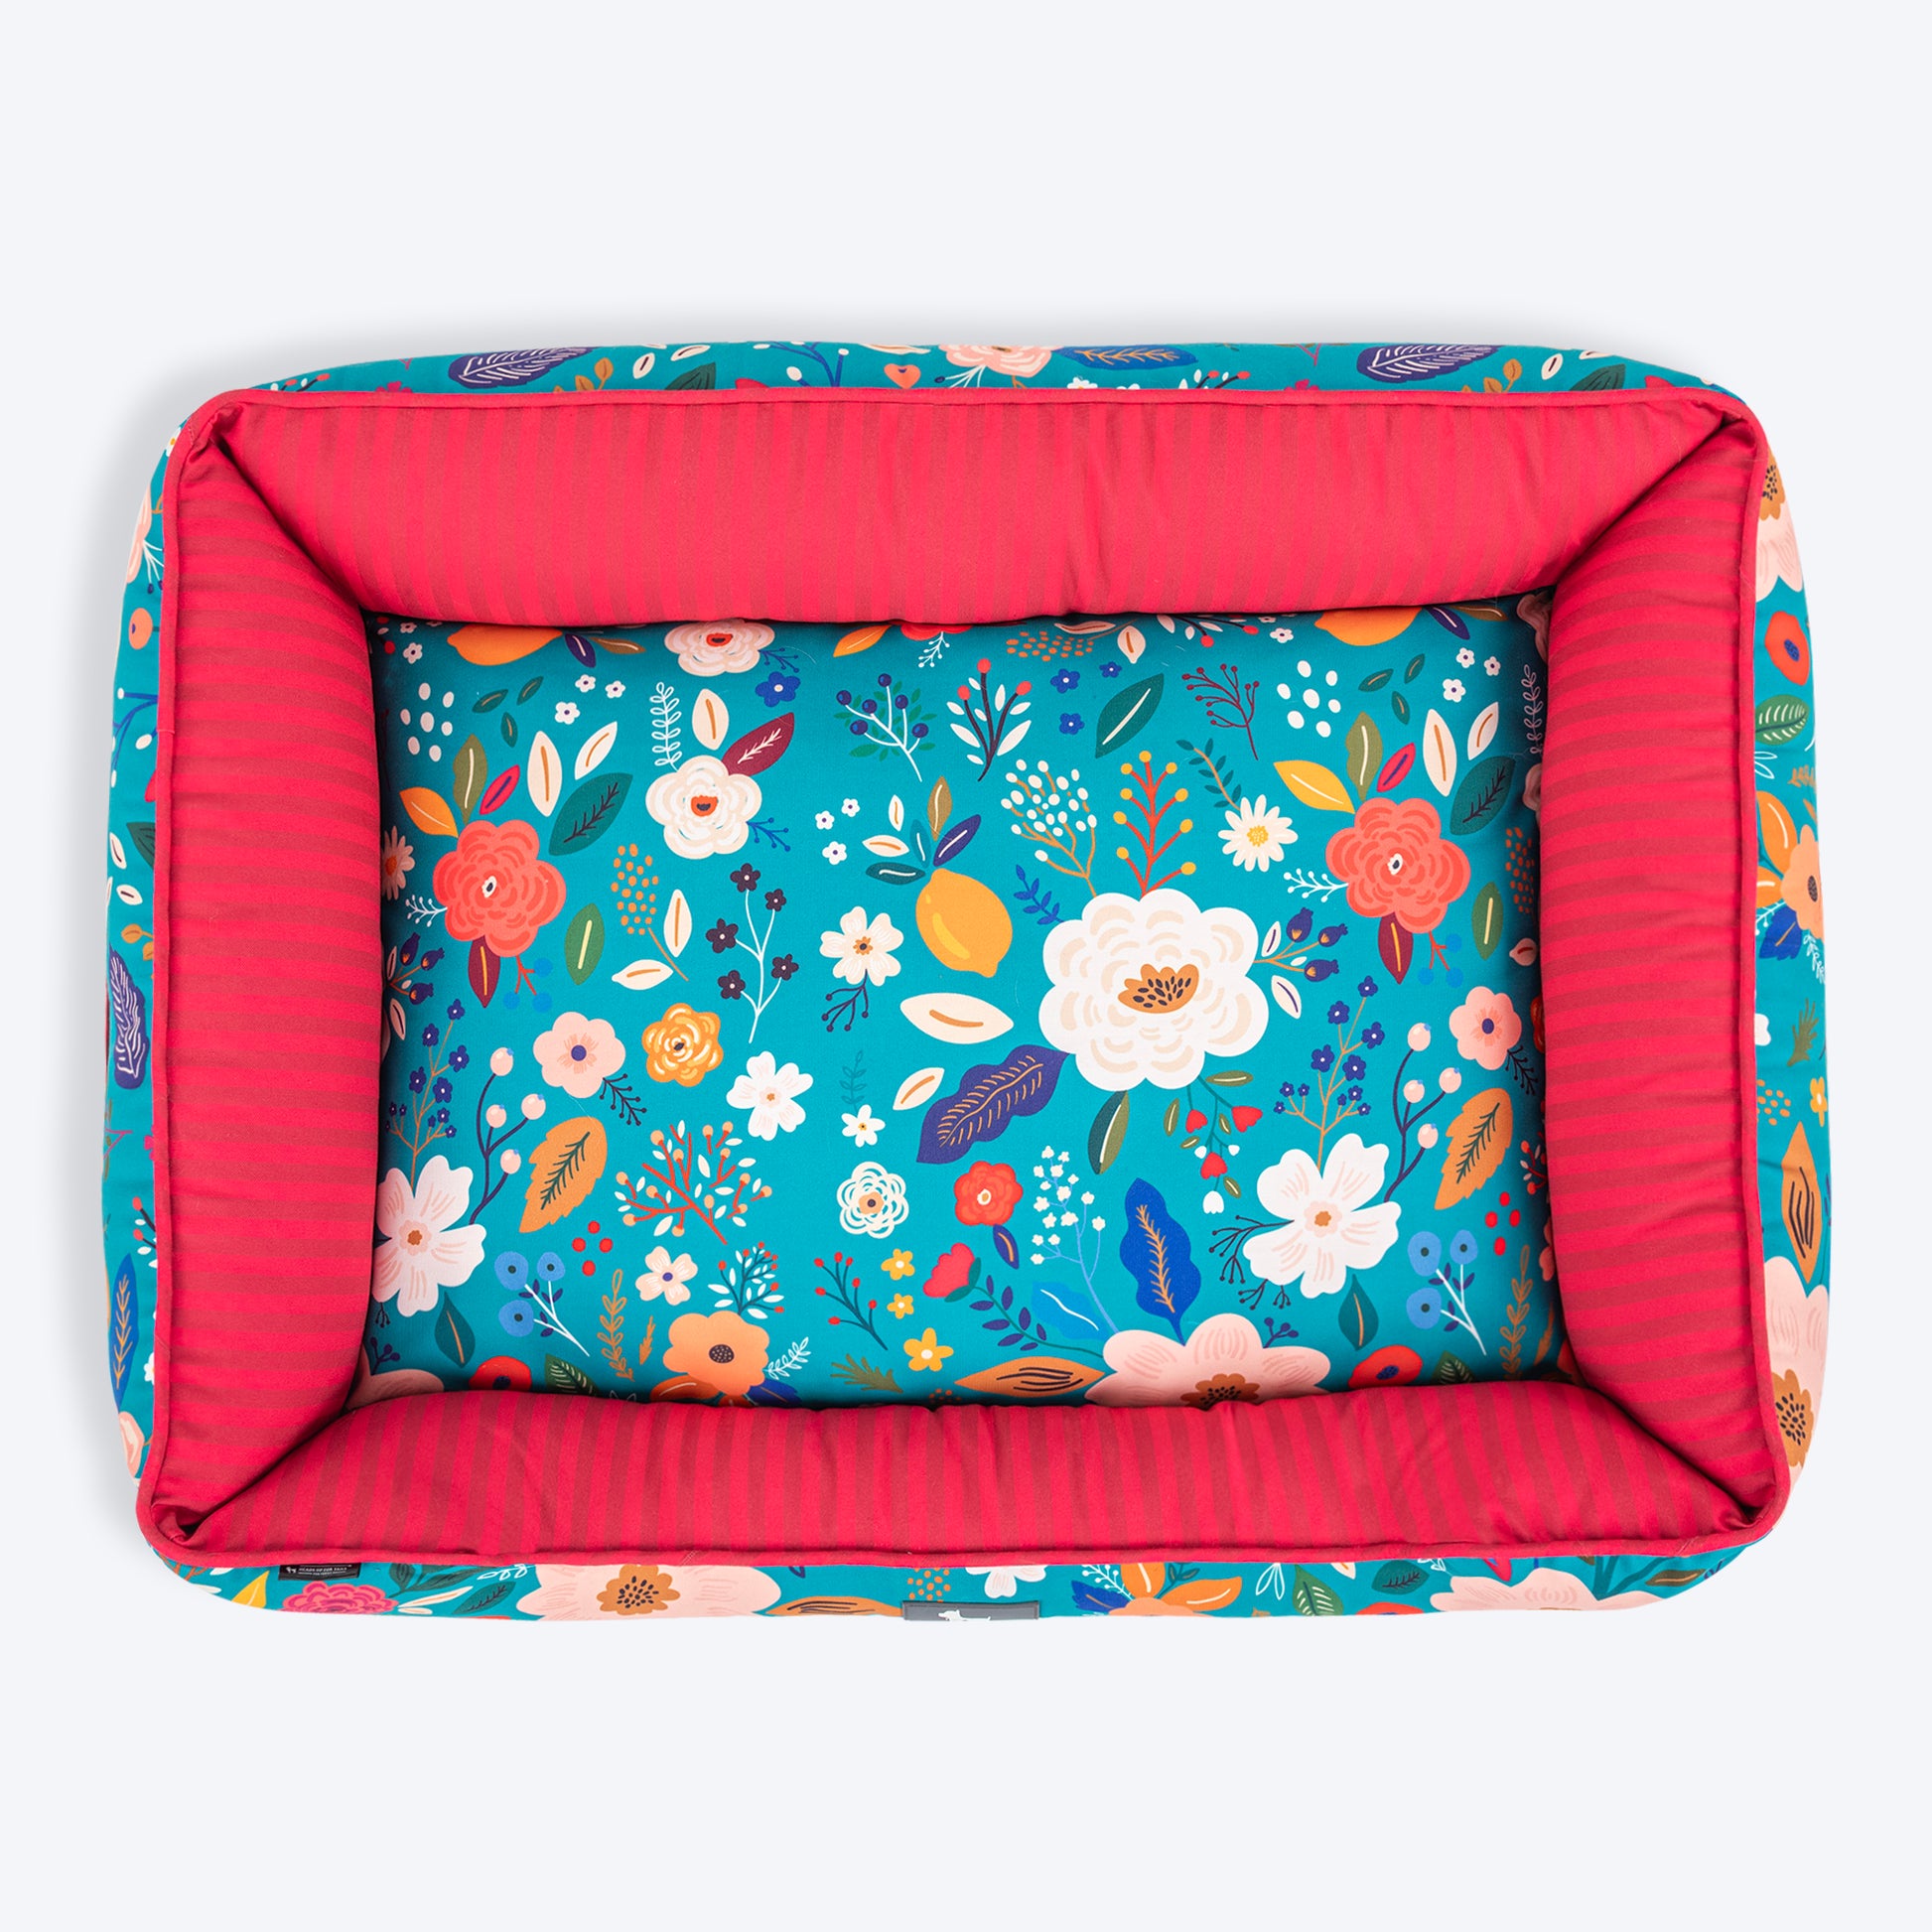 HUFT Blooming Days Lounger Dog Bed - Teal Green - Heads Up For Tails